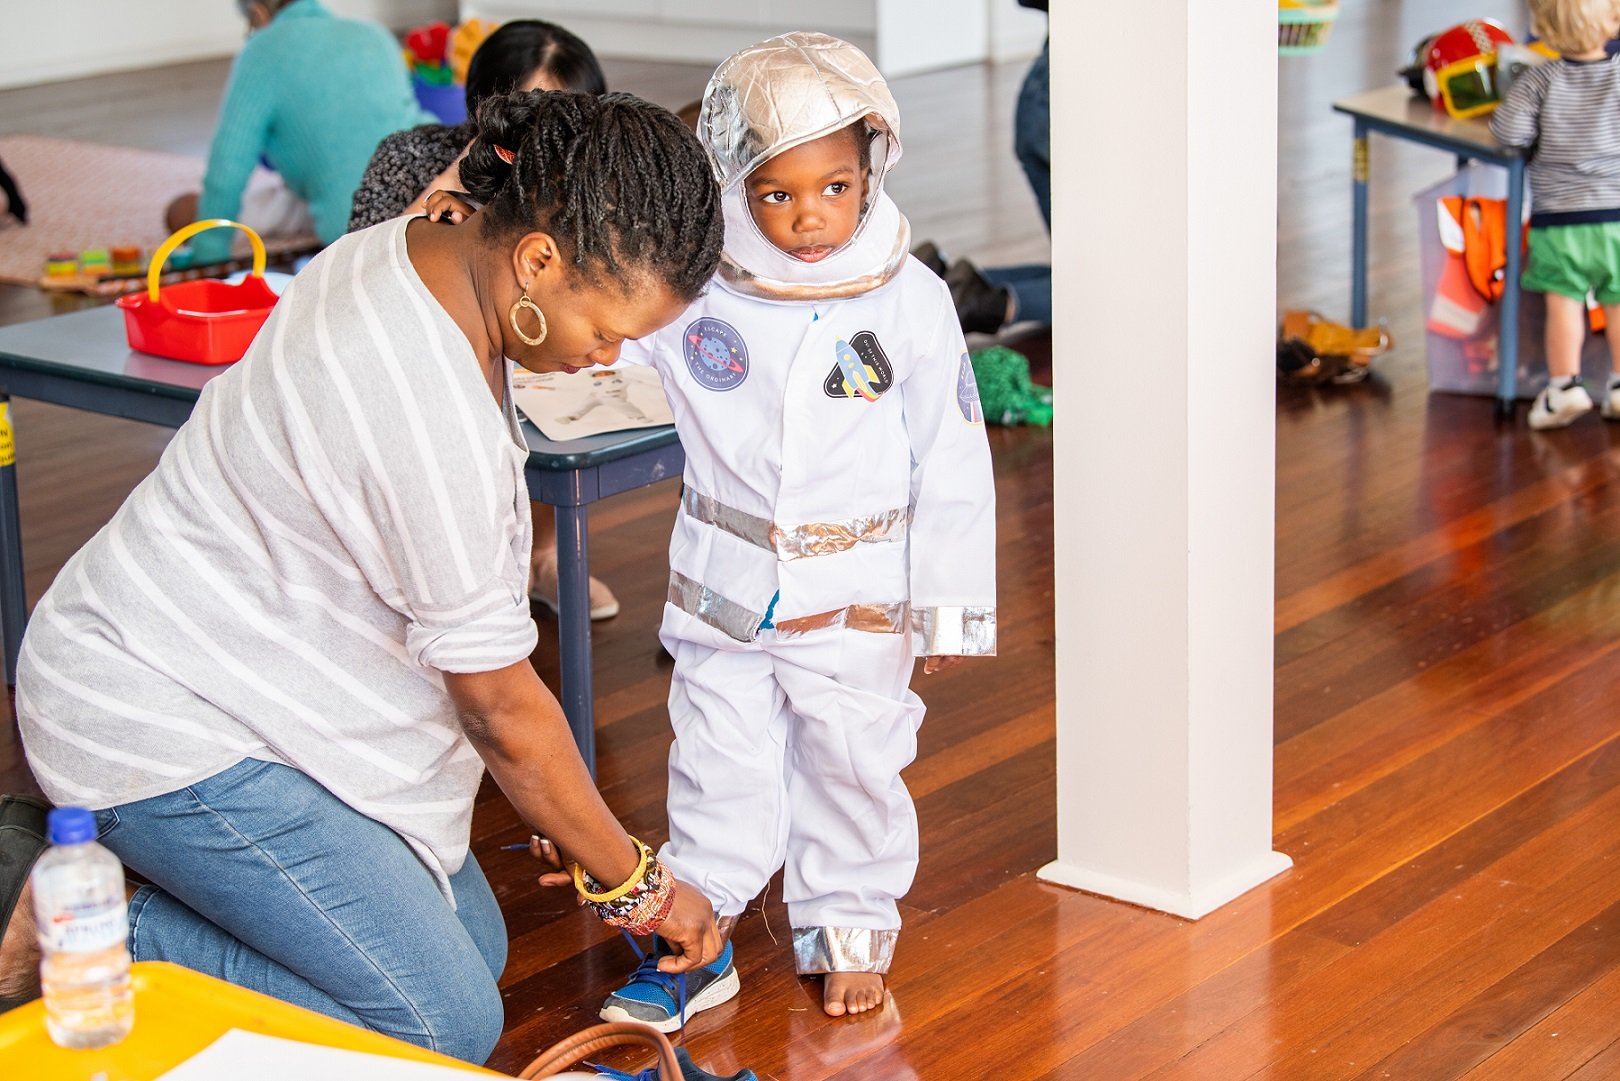 Parent tying shoes of child engaged in imaginative play dressed as an astronaut.